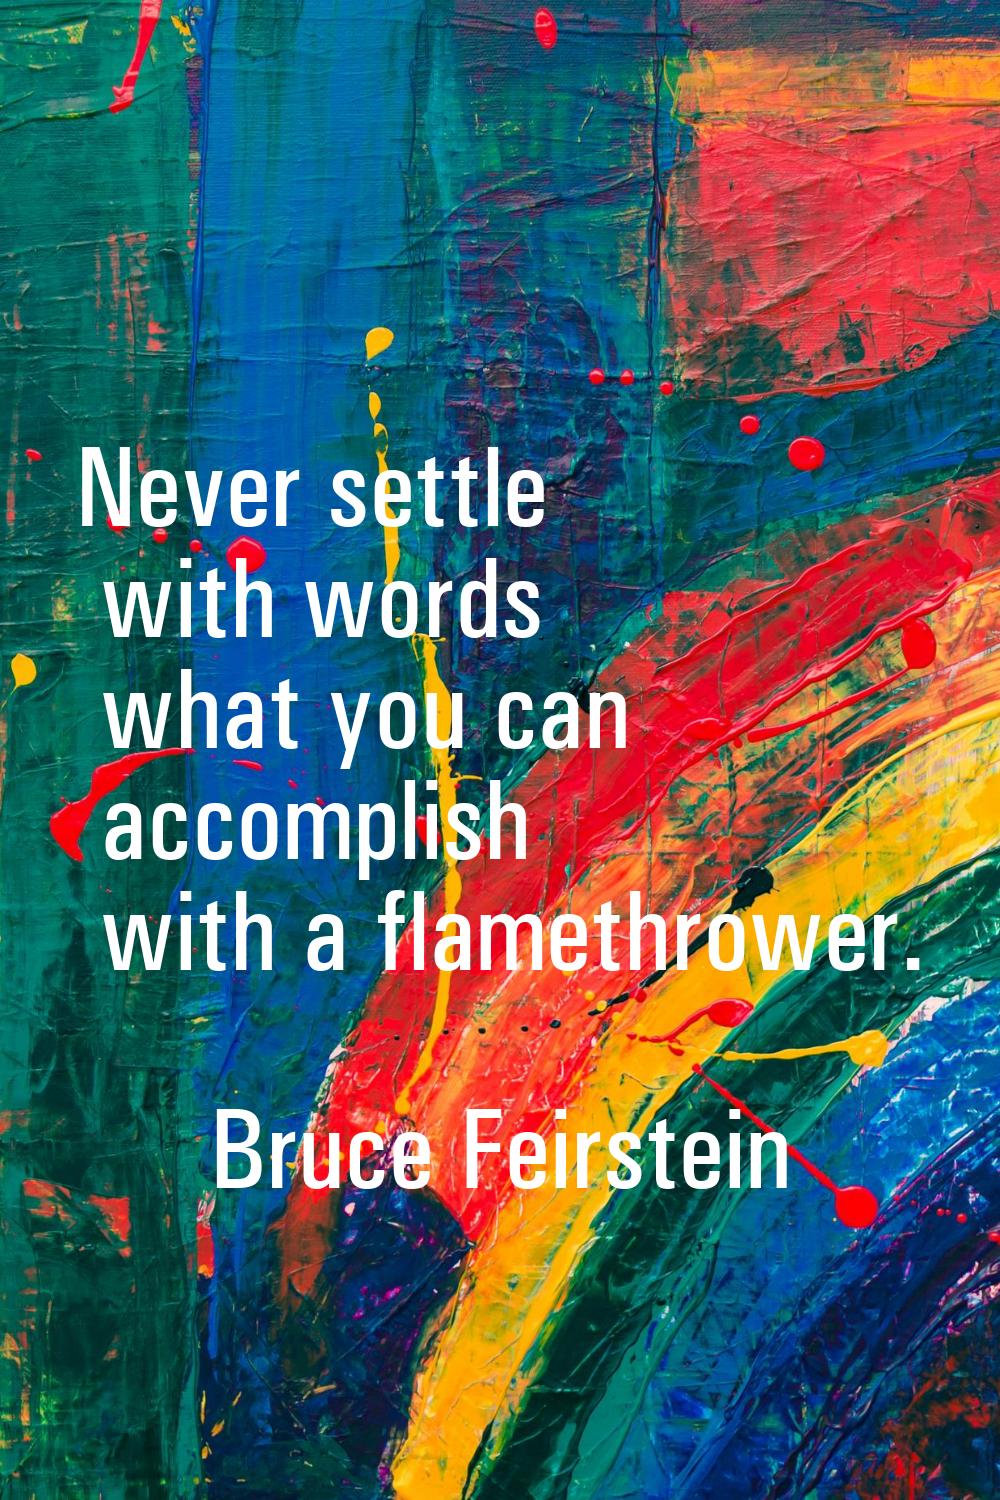 Never settle with words what you can accomplish with a flamethrower.